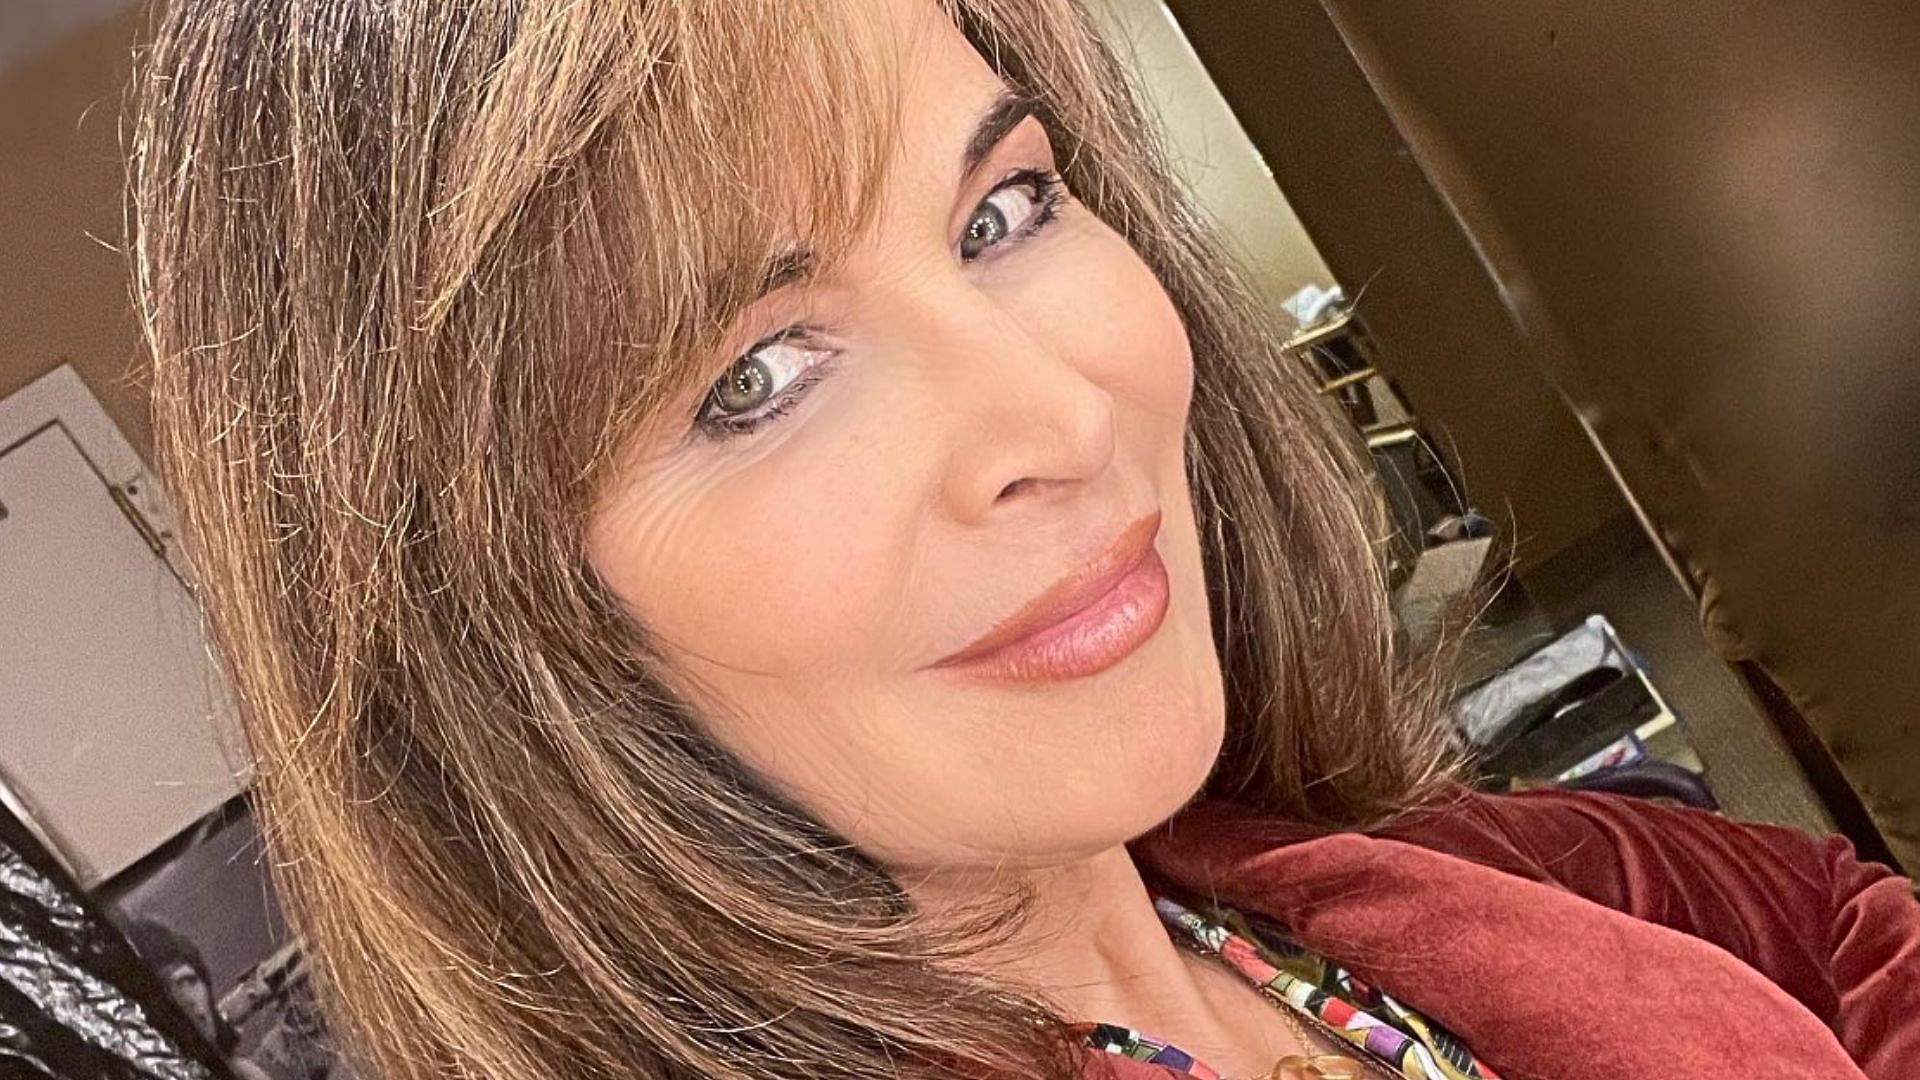 Kate is played by actress Lauren Koslow on Days of Our Lives (Image via Instagram/@laurenkoslow)